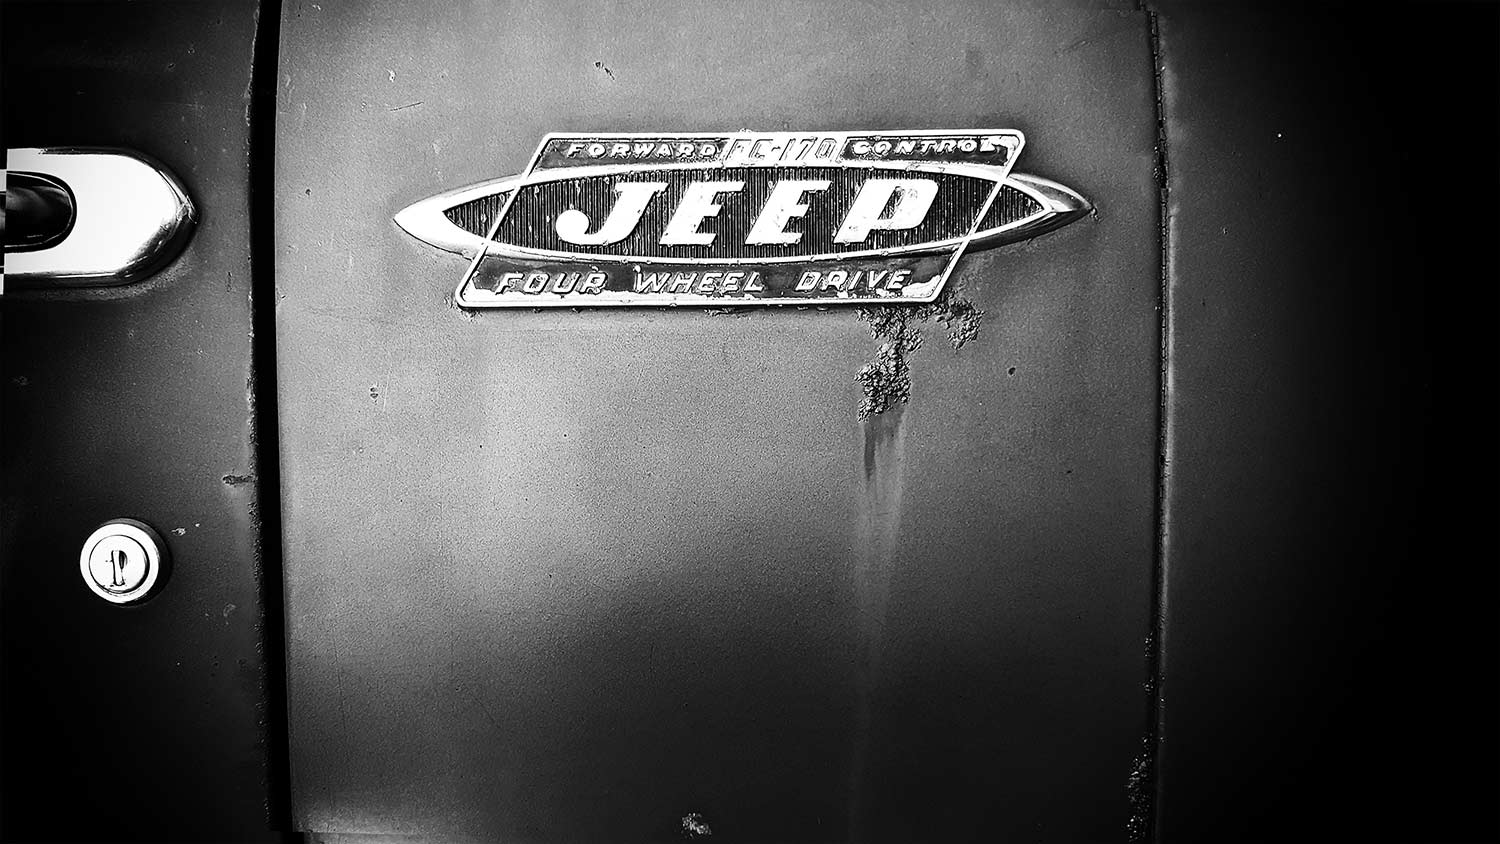 jeep forward control©2017 by bret wills